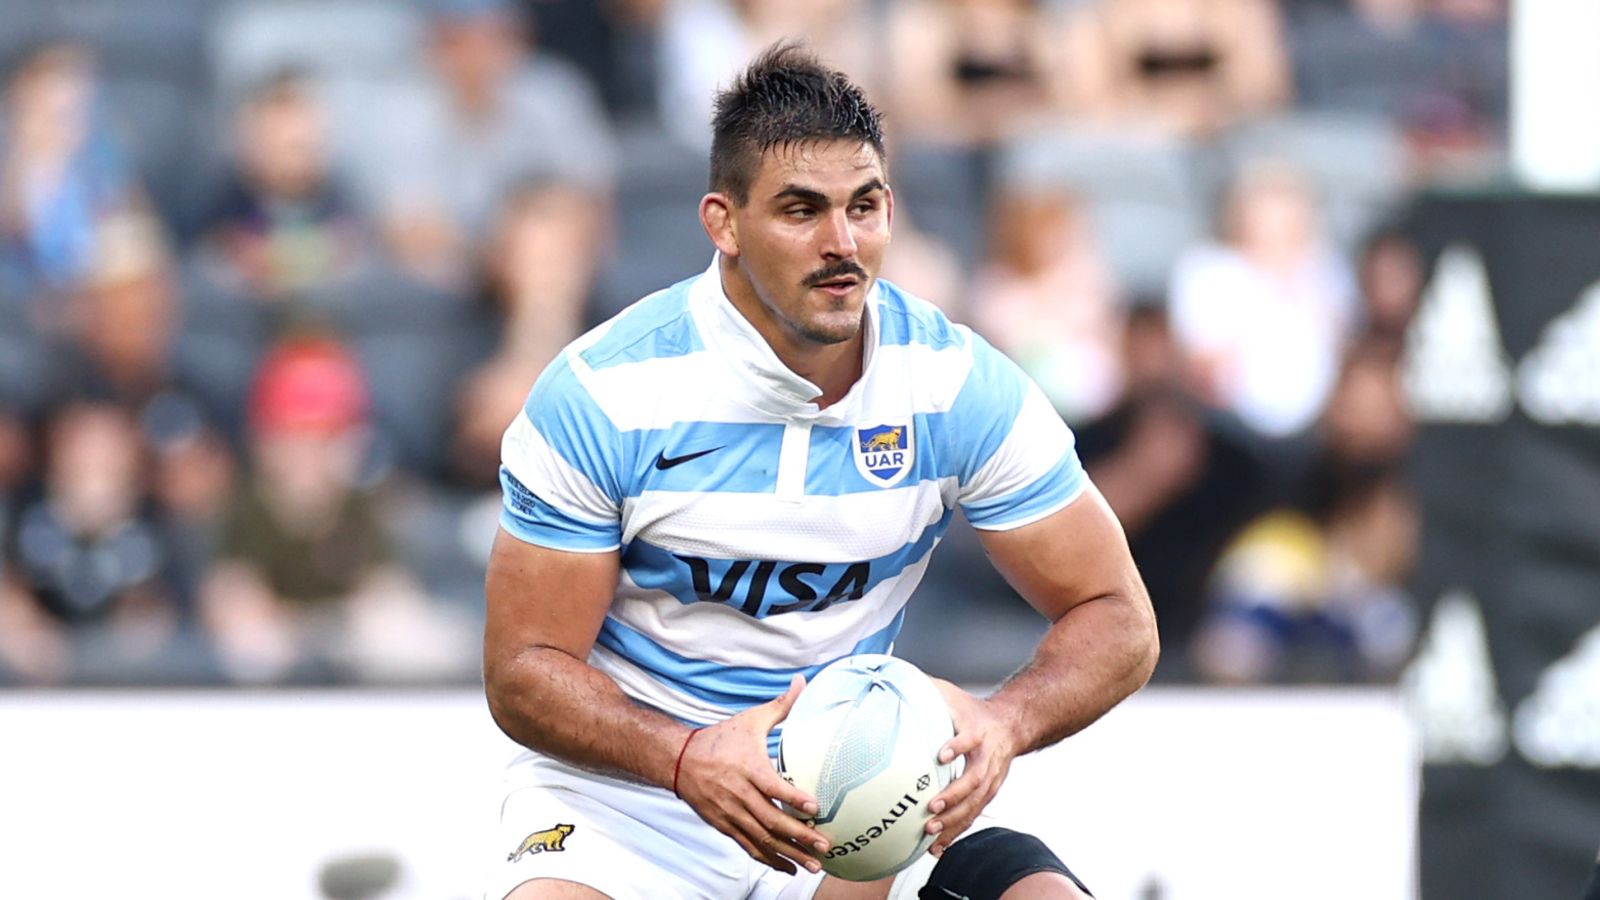 Pablo Matera stripped of Argentina captaincy racist social media posts Rugby Union News | Sports